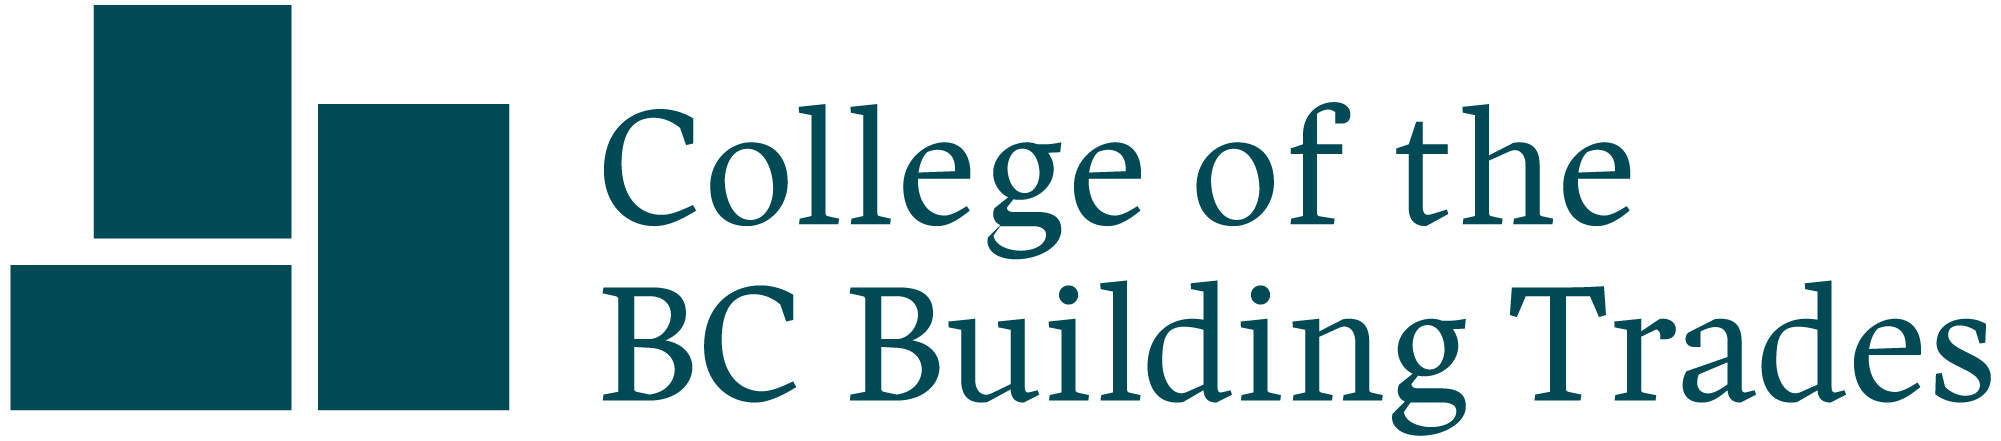 College of the BC Building Trades